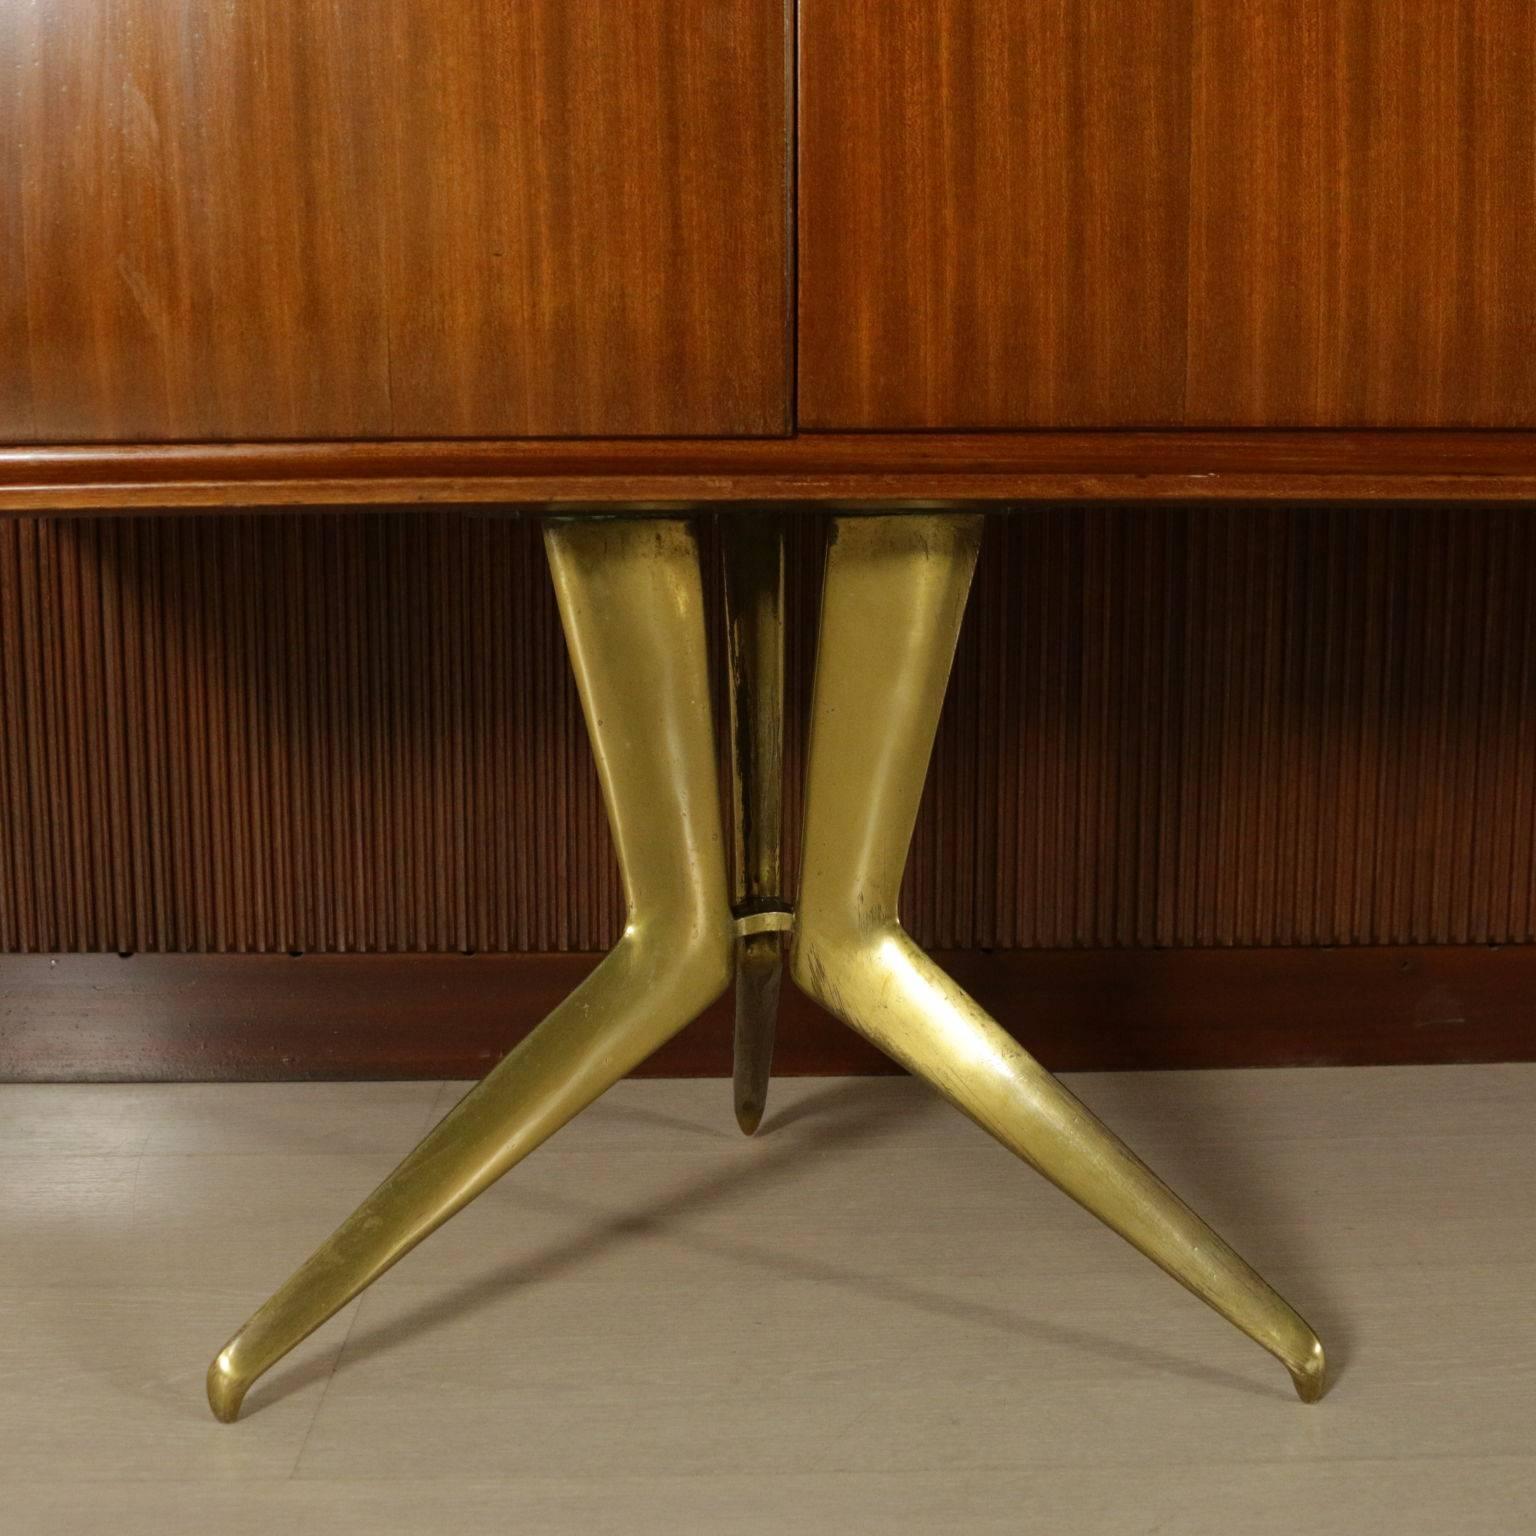 Mid-20th Century Piece of Furniture Designed by Gambarelli Mahogany Vintage, Italy, 1958